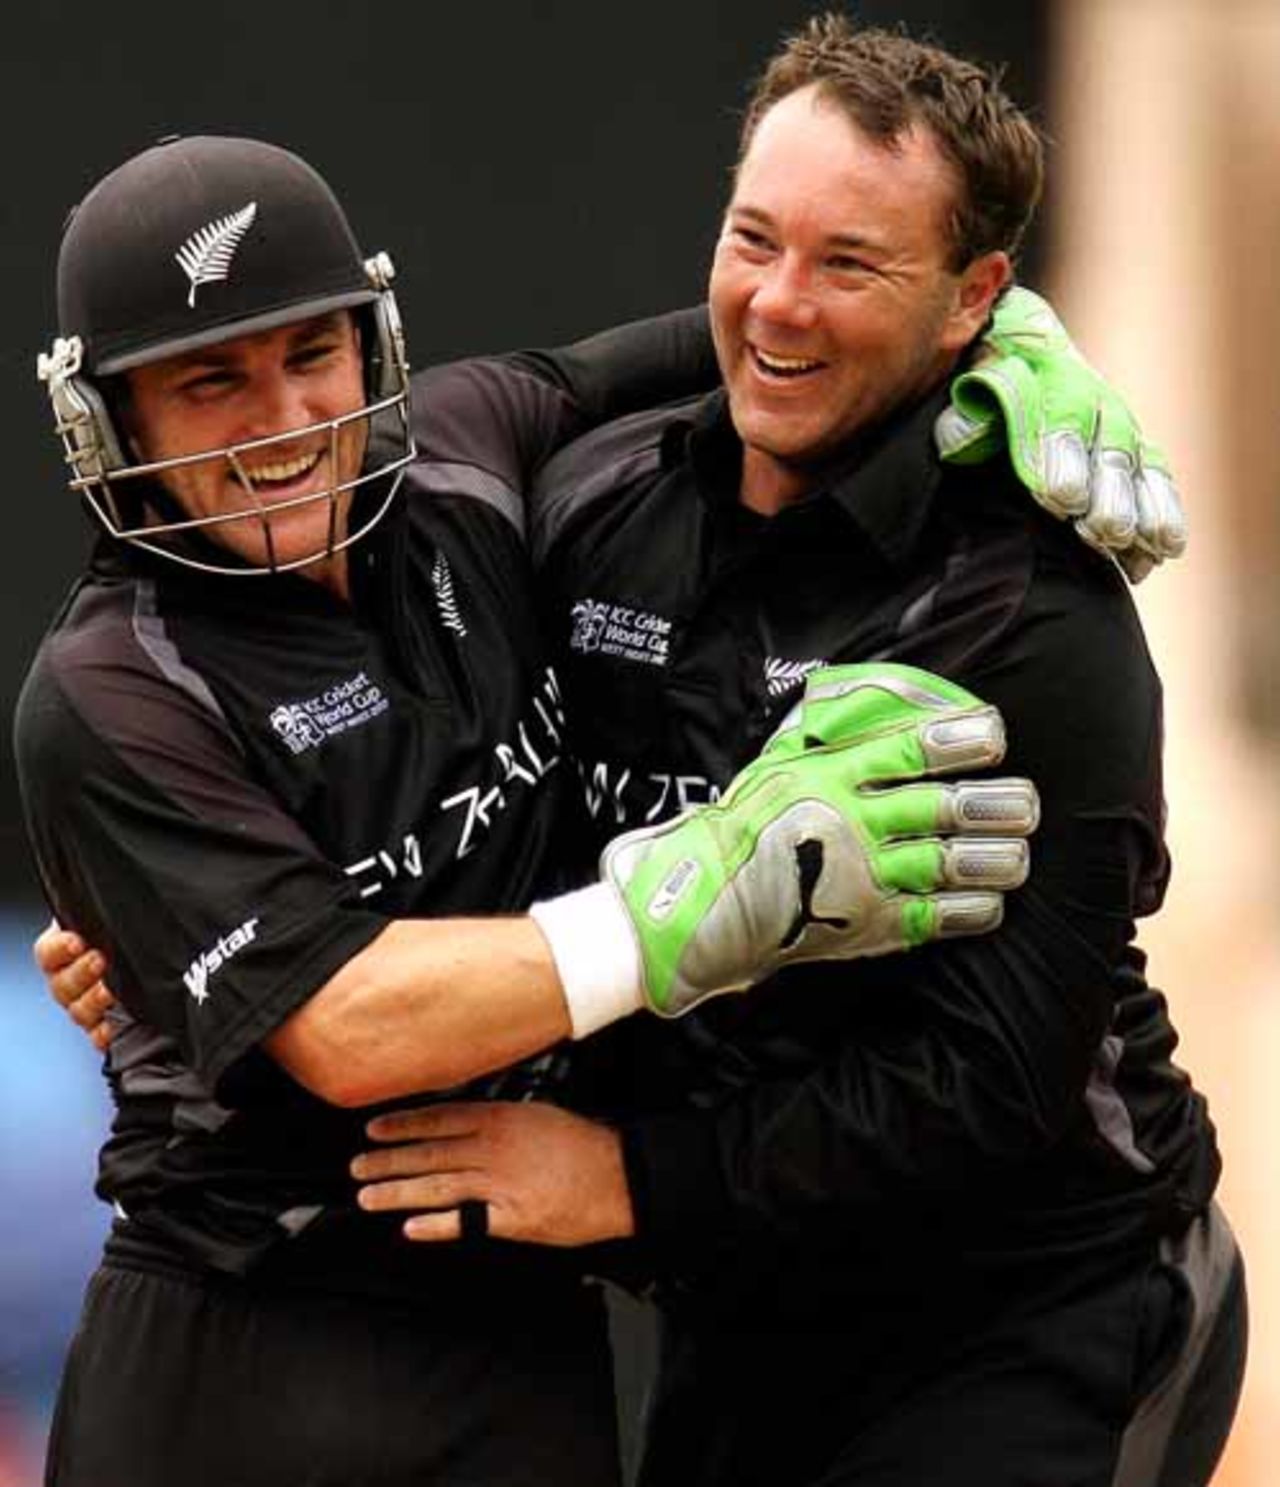 Craig McMillan is delighted after getting three wickets in quick succession, New Zealand v South Africa, Super Eights, Grenada, April 14, 2007 